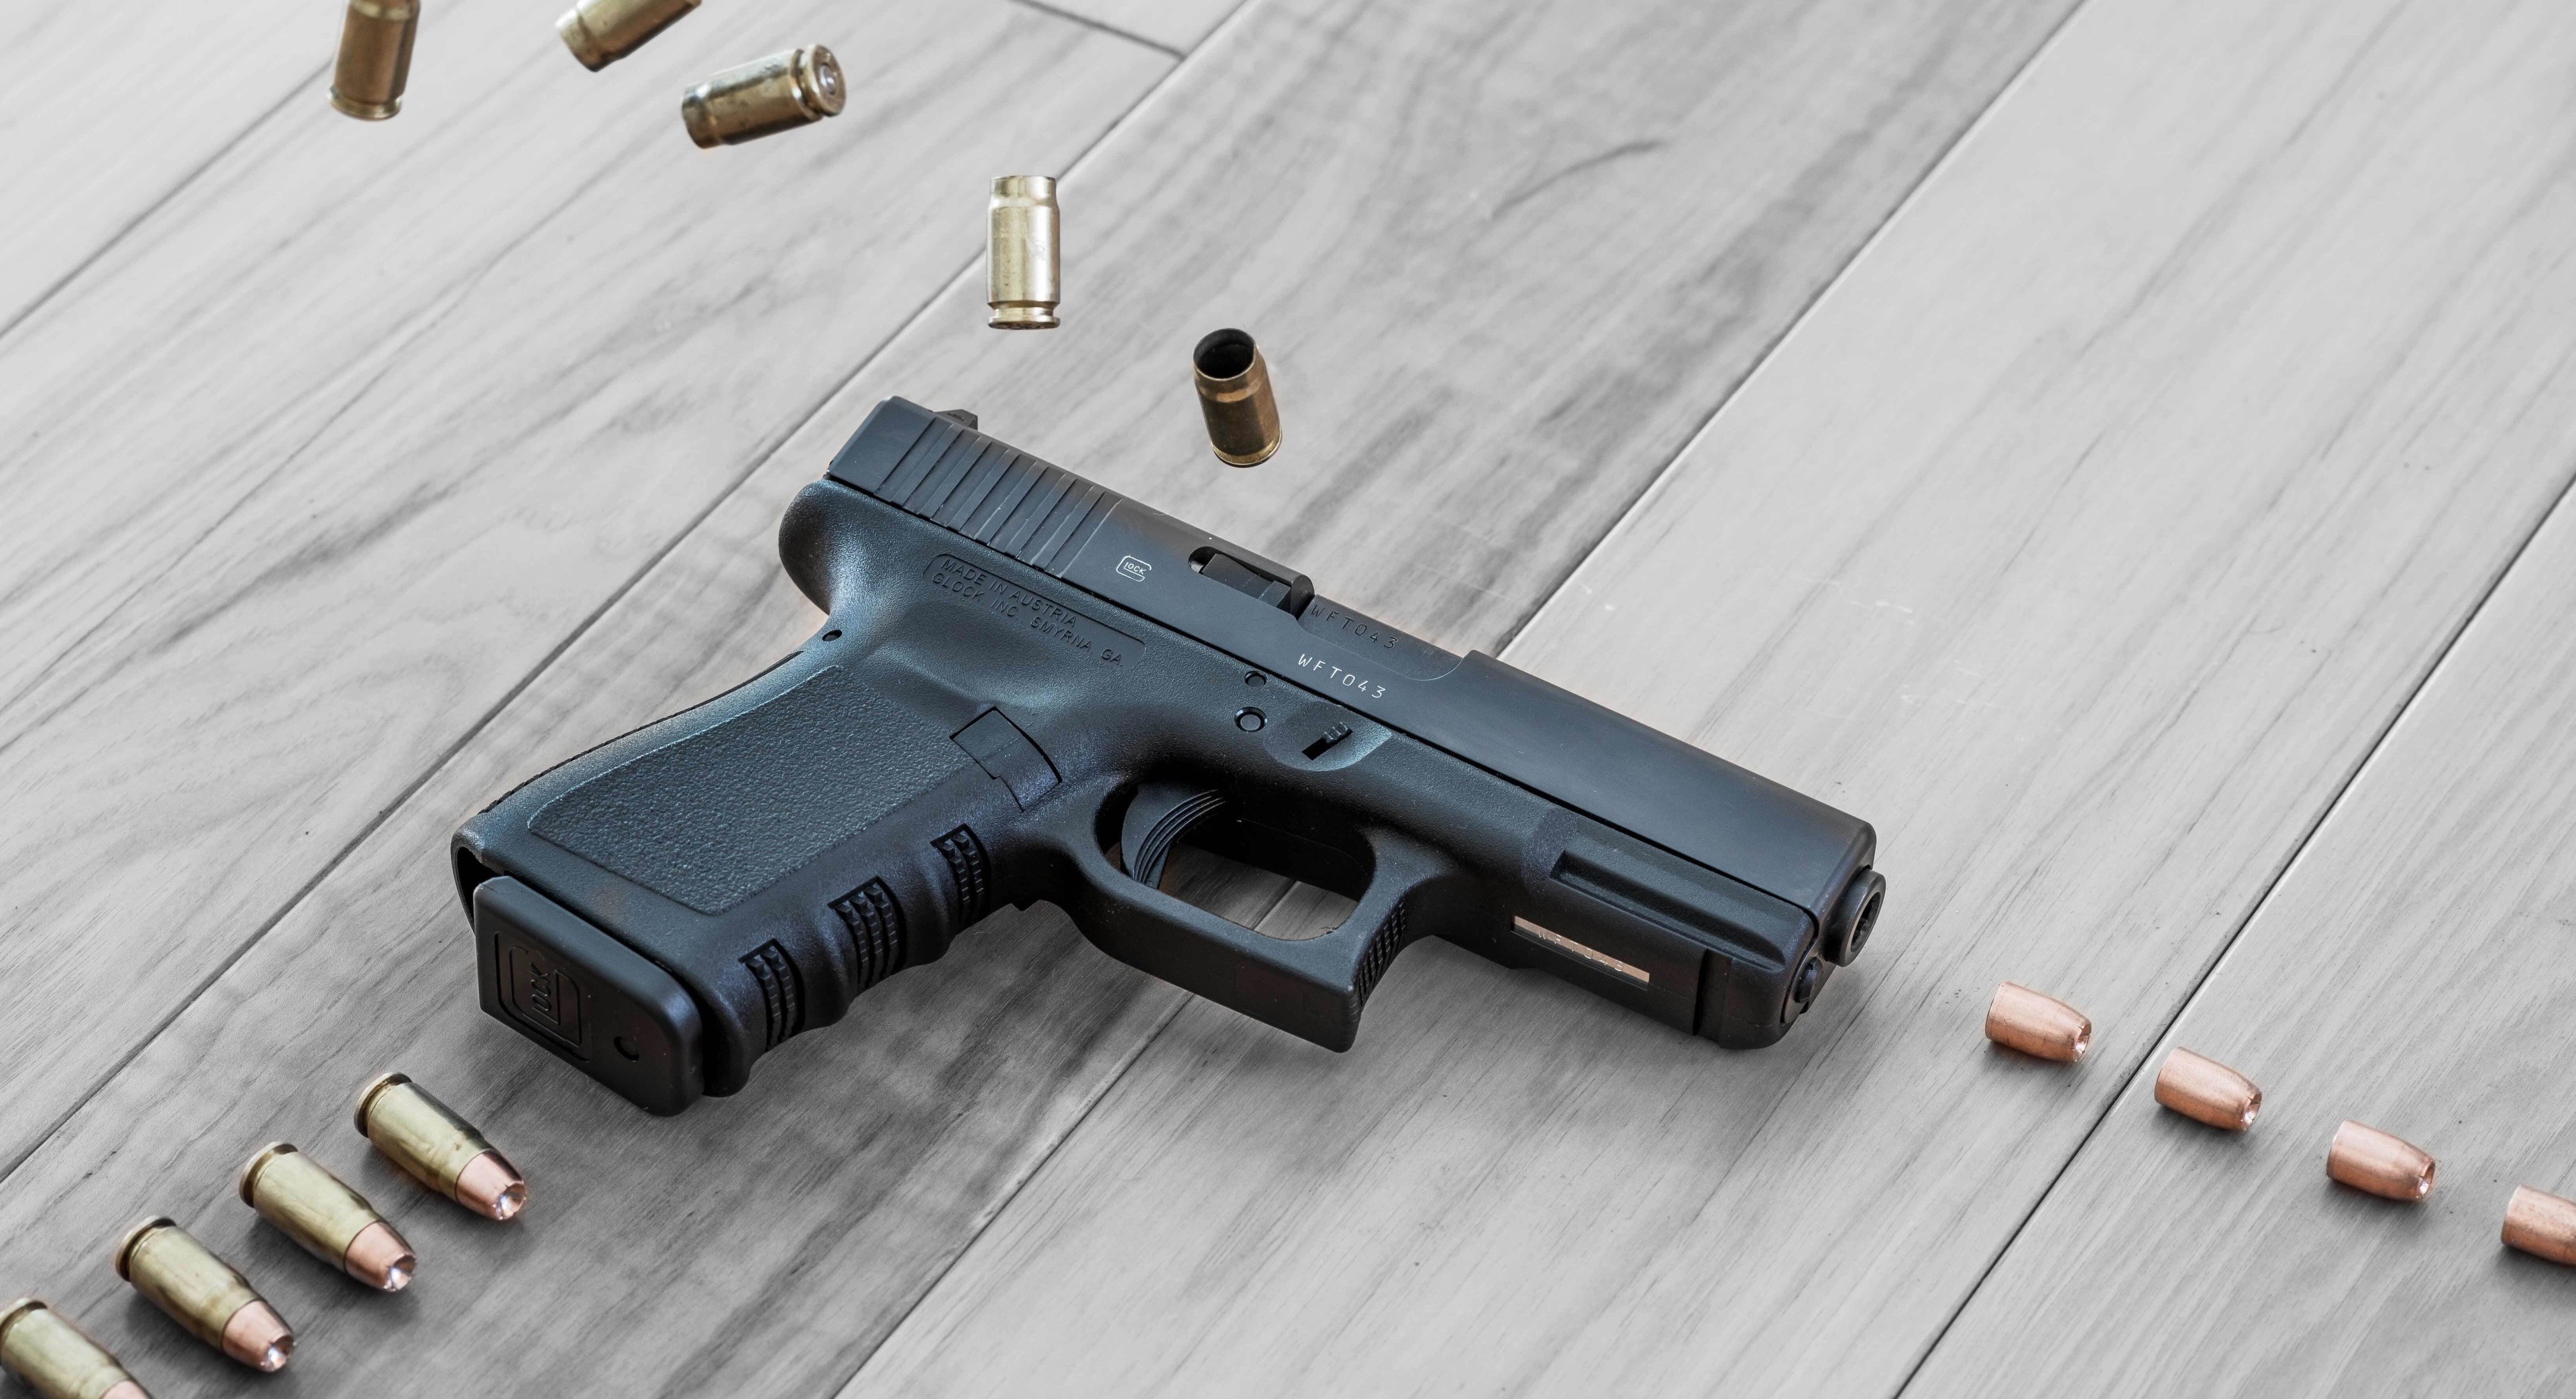 3840x2086 3072x1728 3072x1728 Glock 17 Gen 4 Wallpapers Images Photos Pictures  Backgrounds